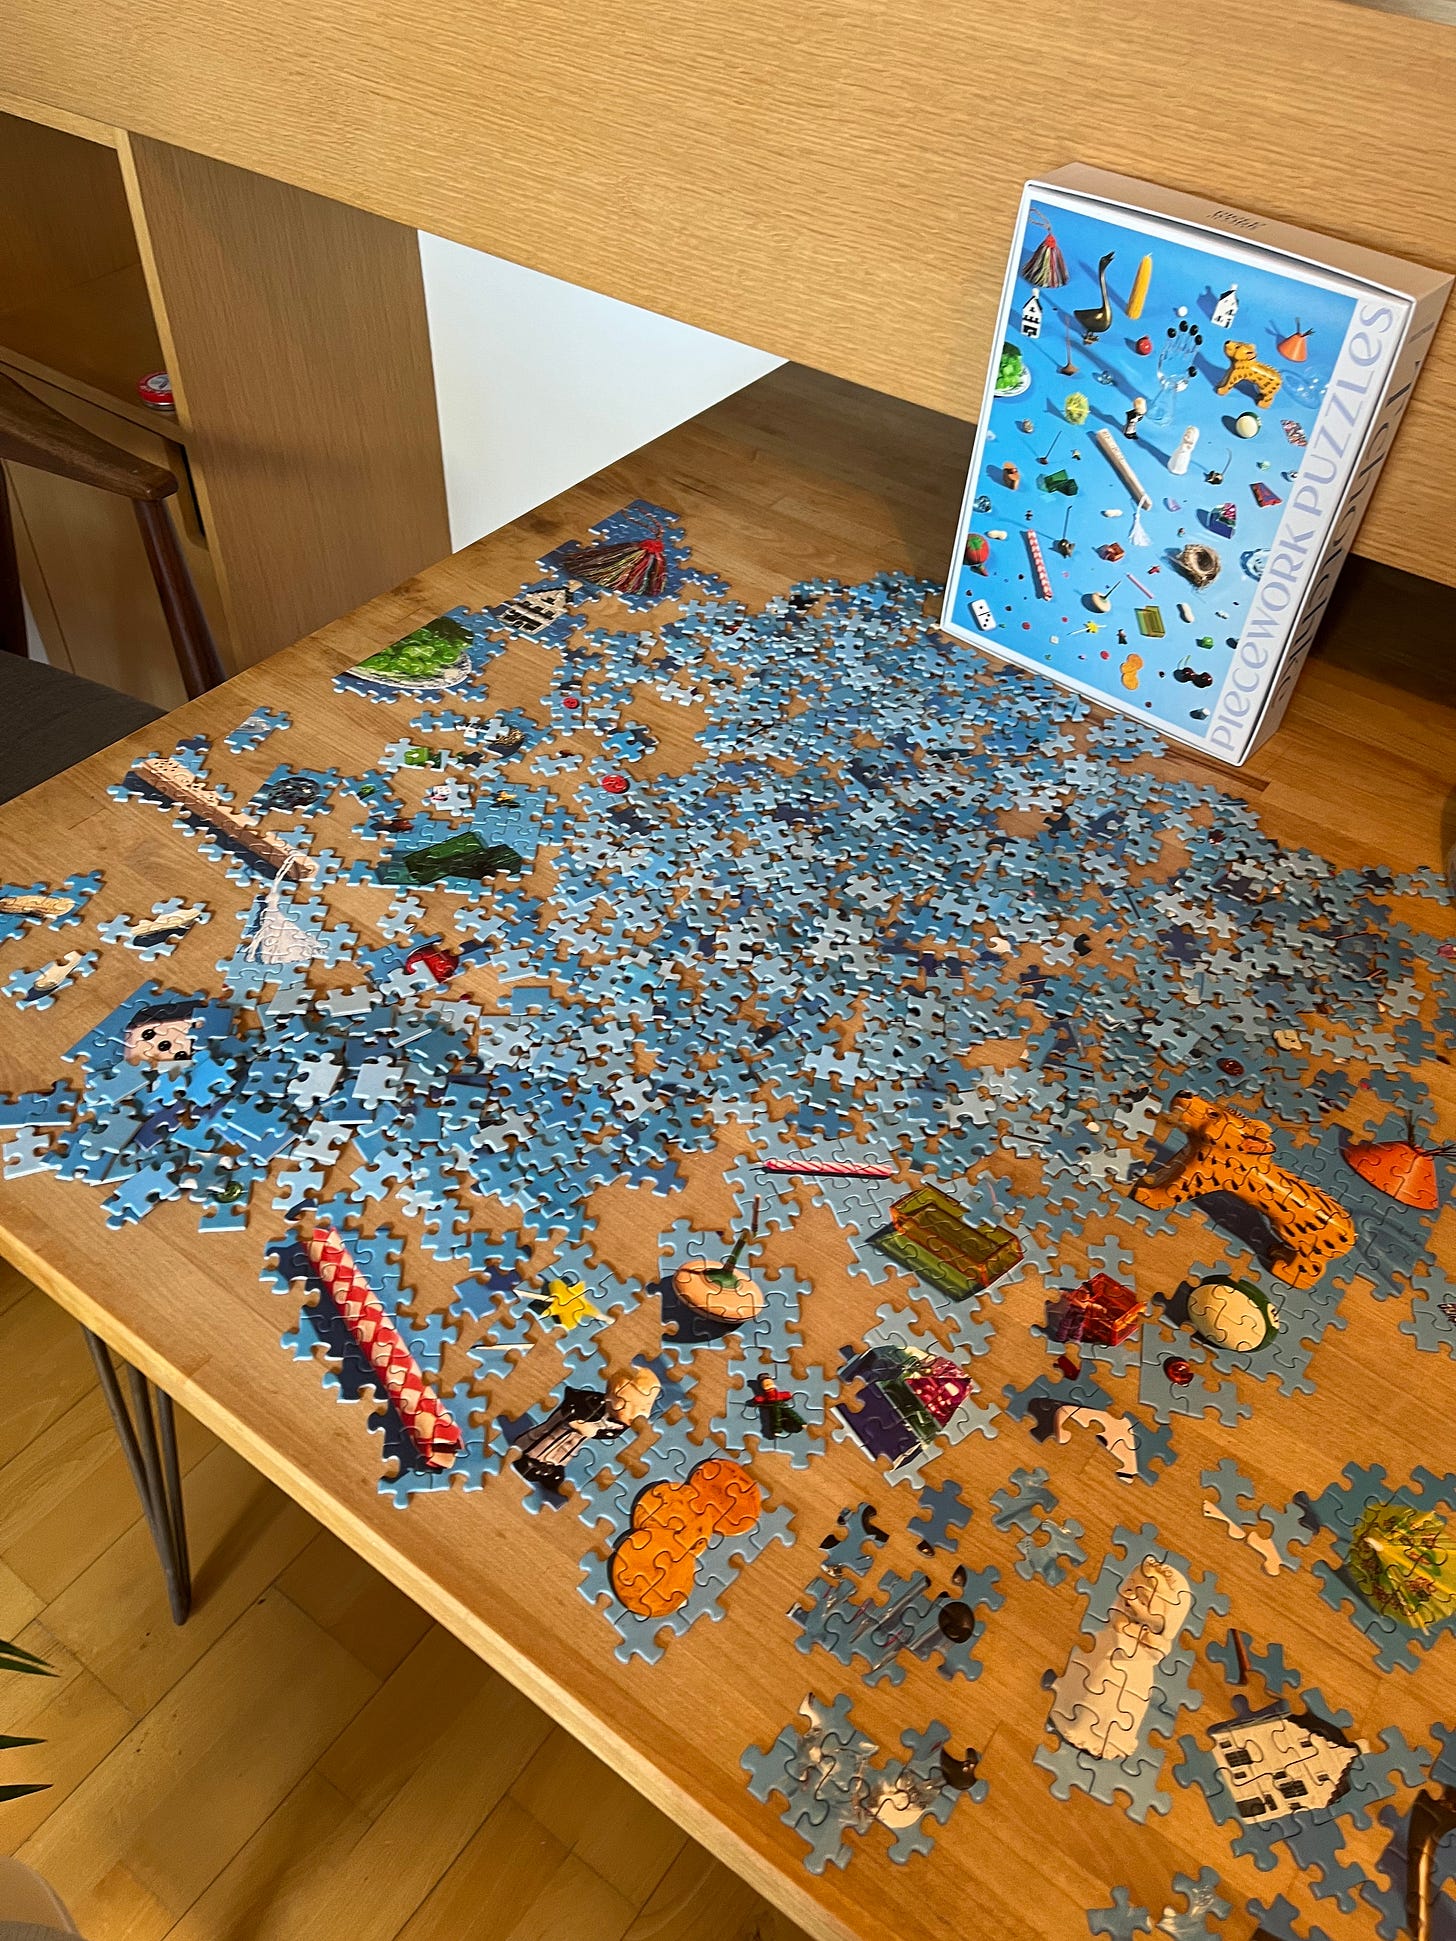 A table covered with an incomplete jigsaw puzzle.